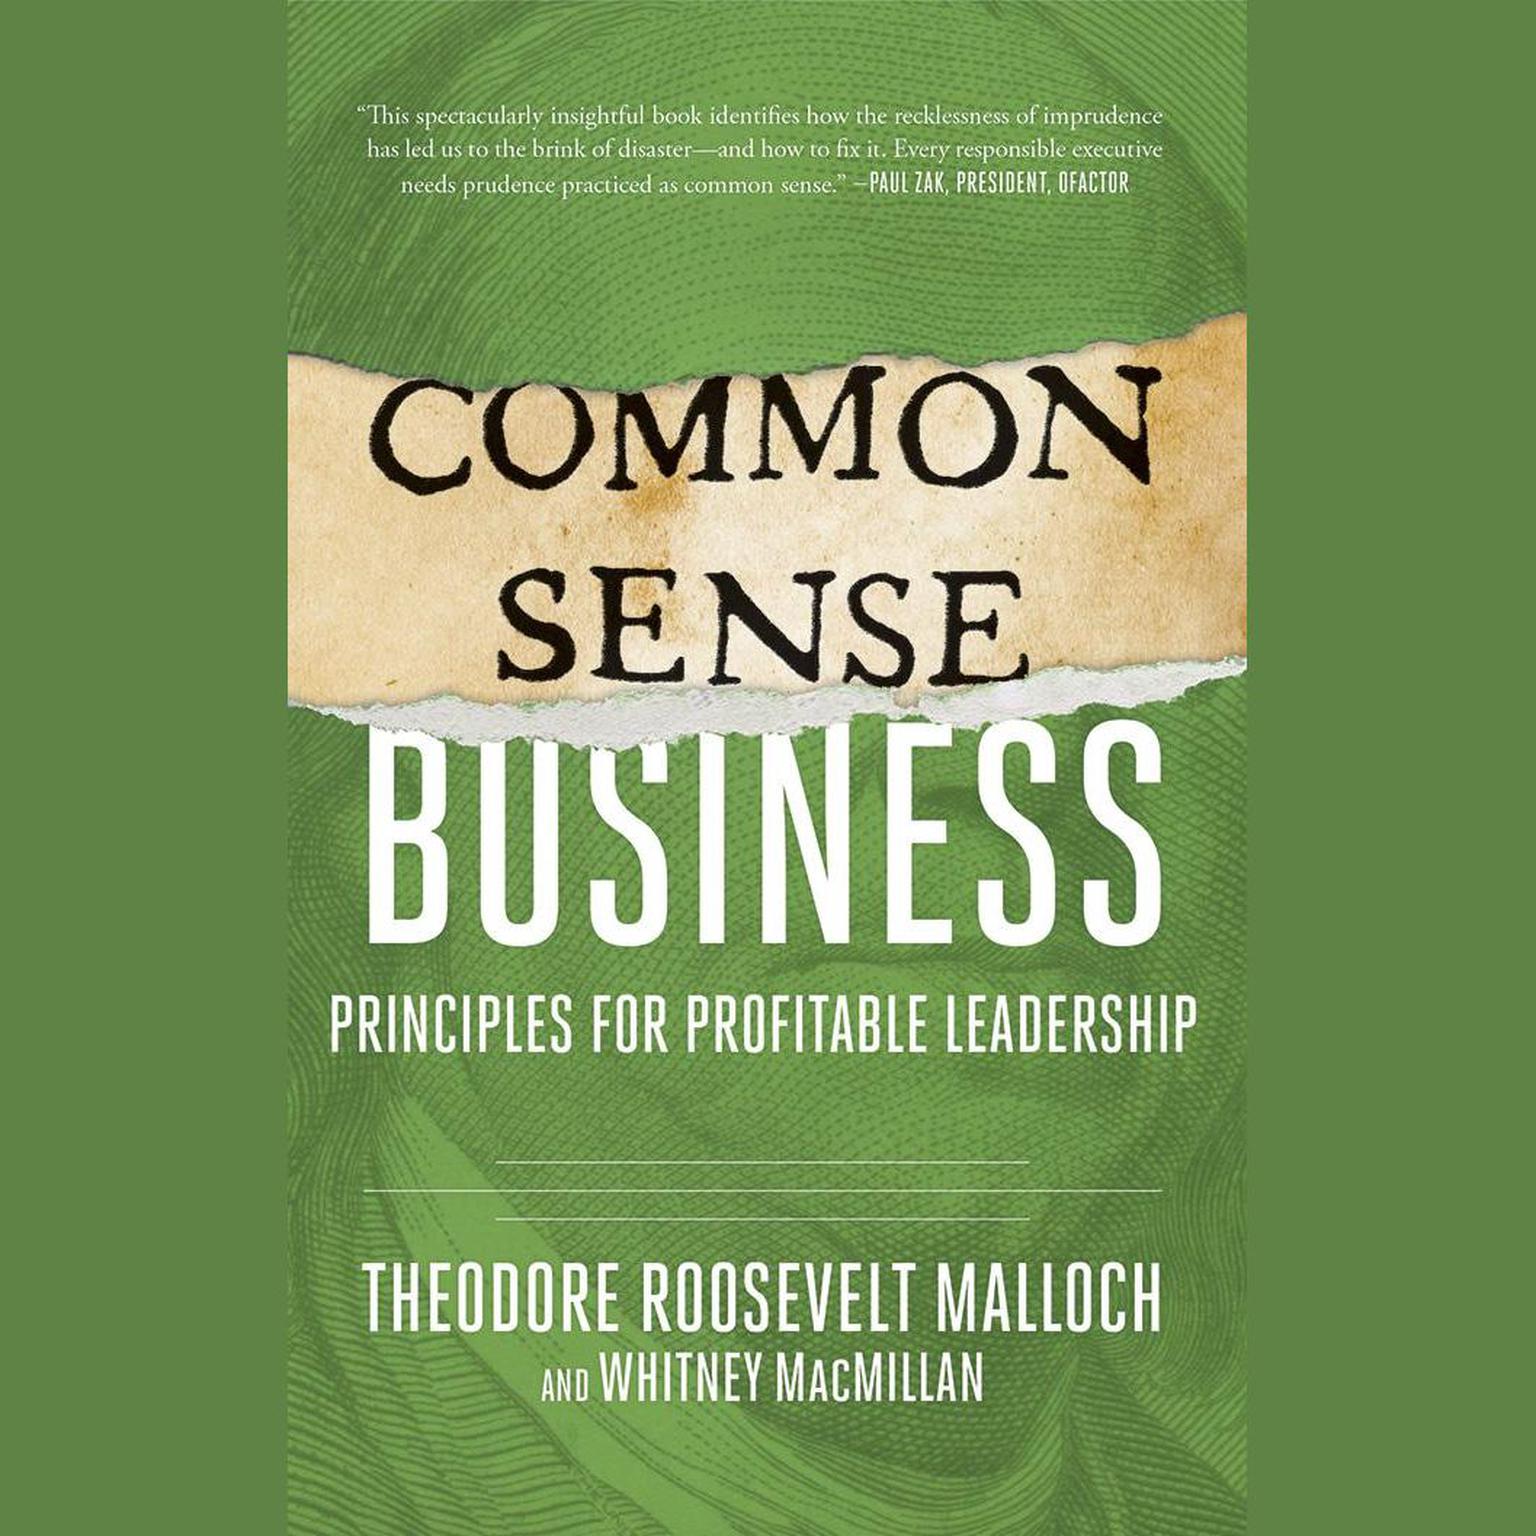 Common-Sense Business: Principles for Profitable Leadership Audiobook, by Theodore Roosevelt Malloch